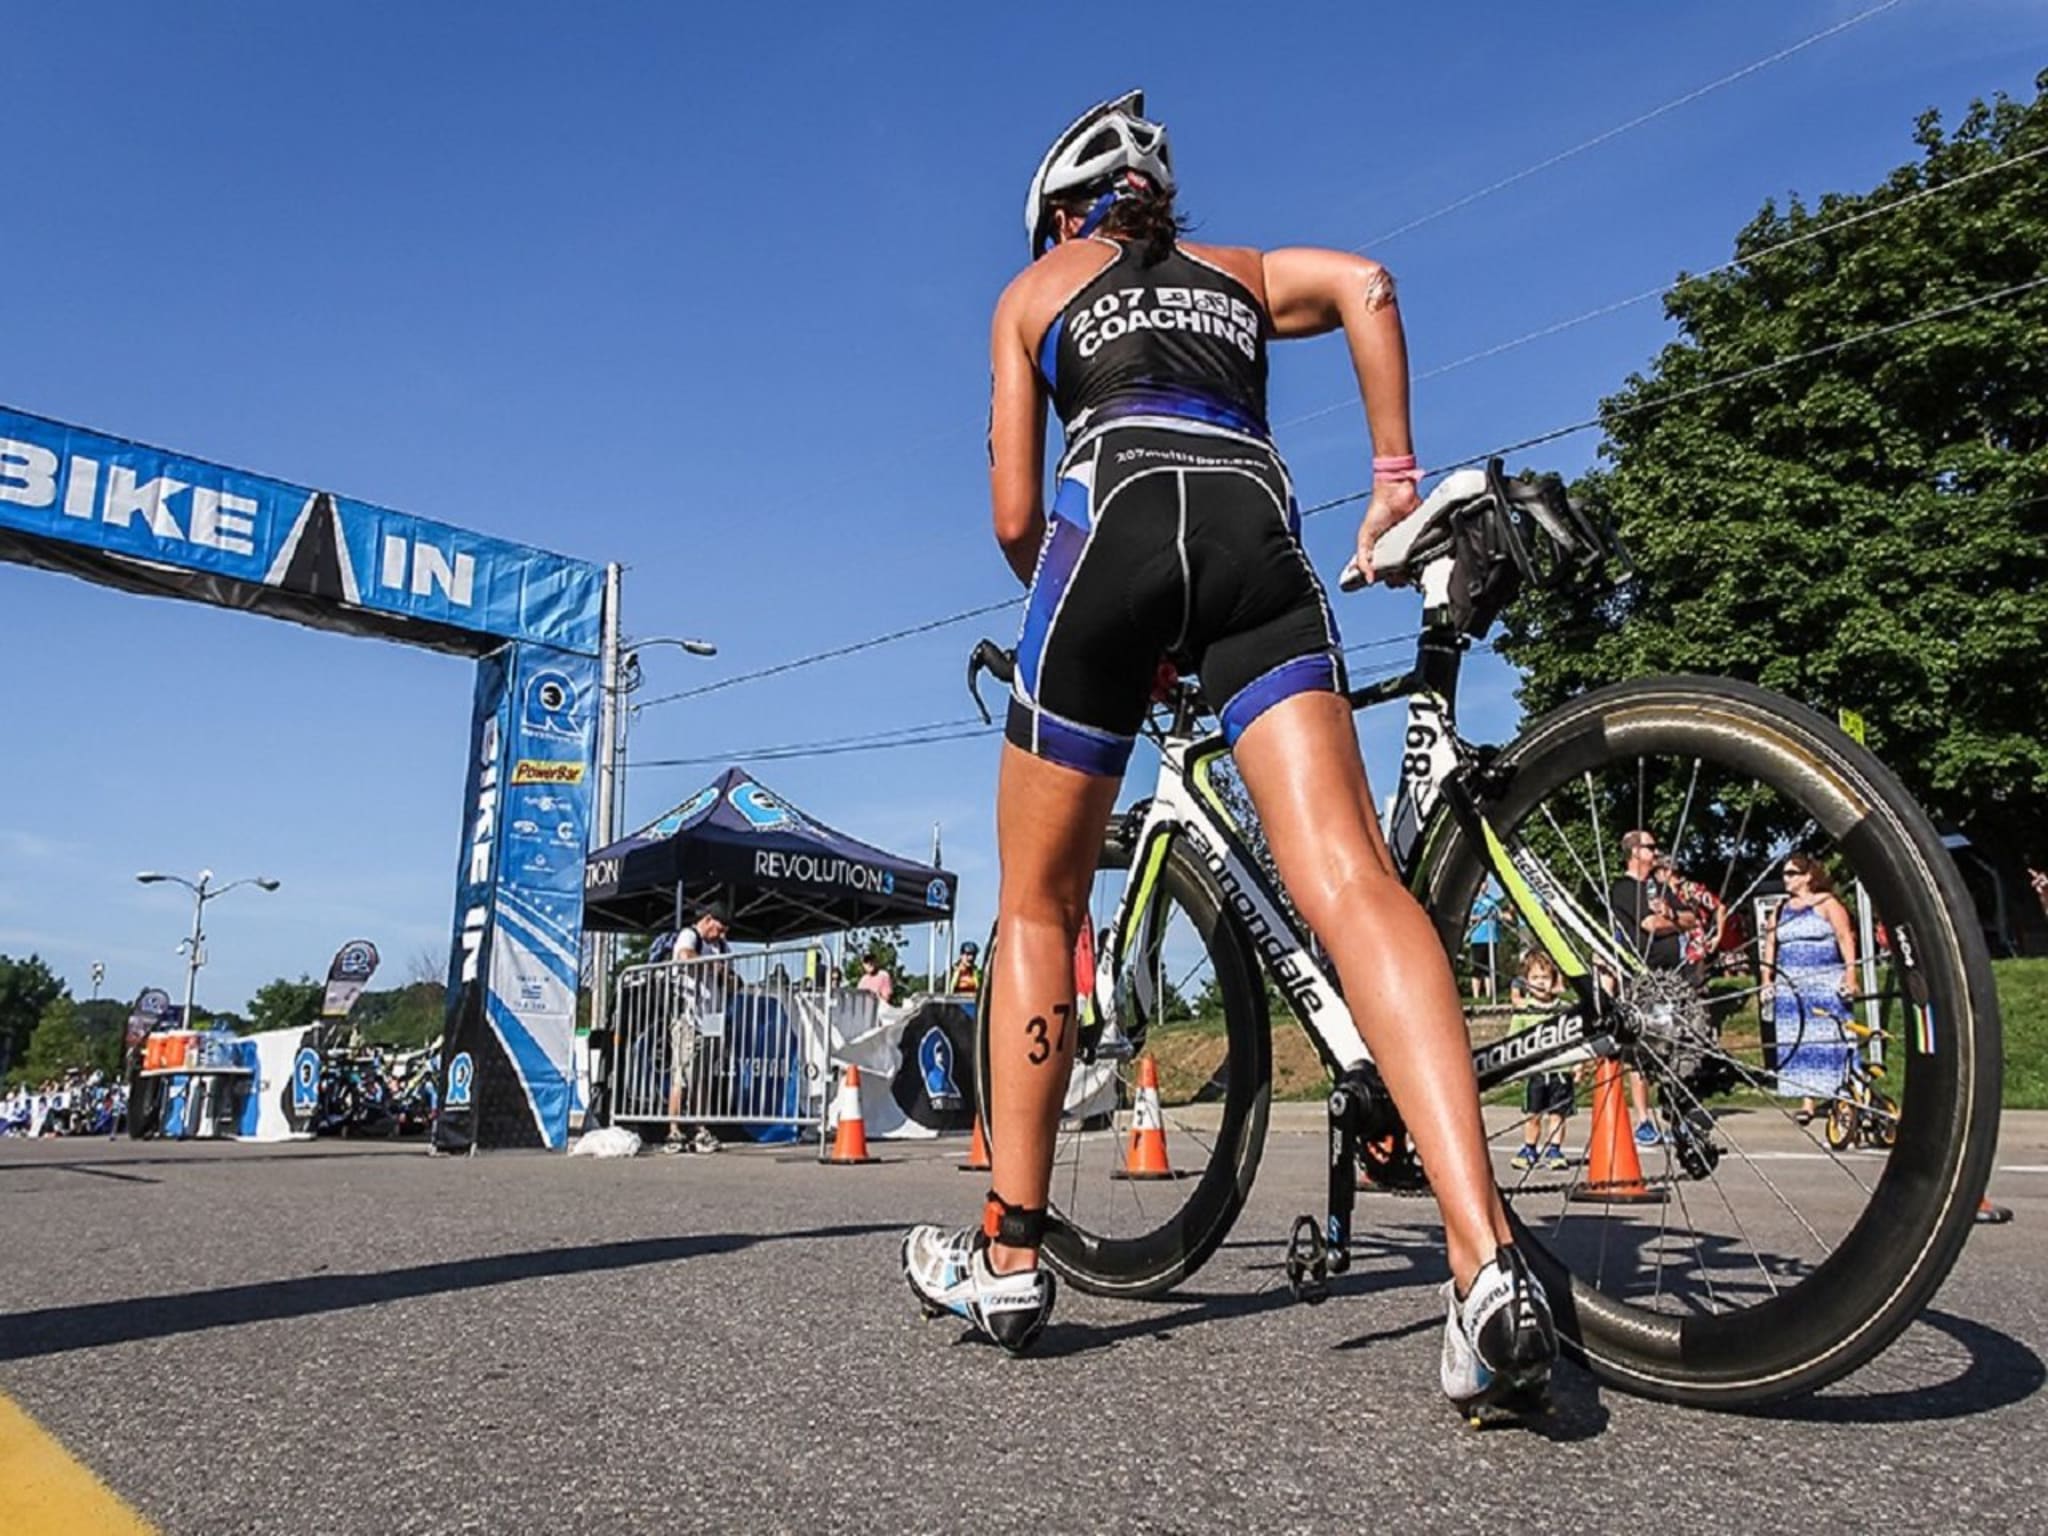 Ironman 70.3 Maine 2019 — Sun 25 Aug — Book Now at Let's Do This